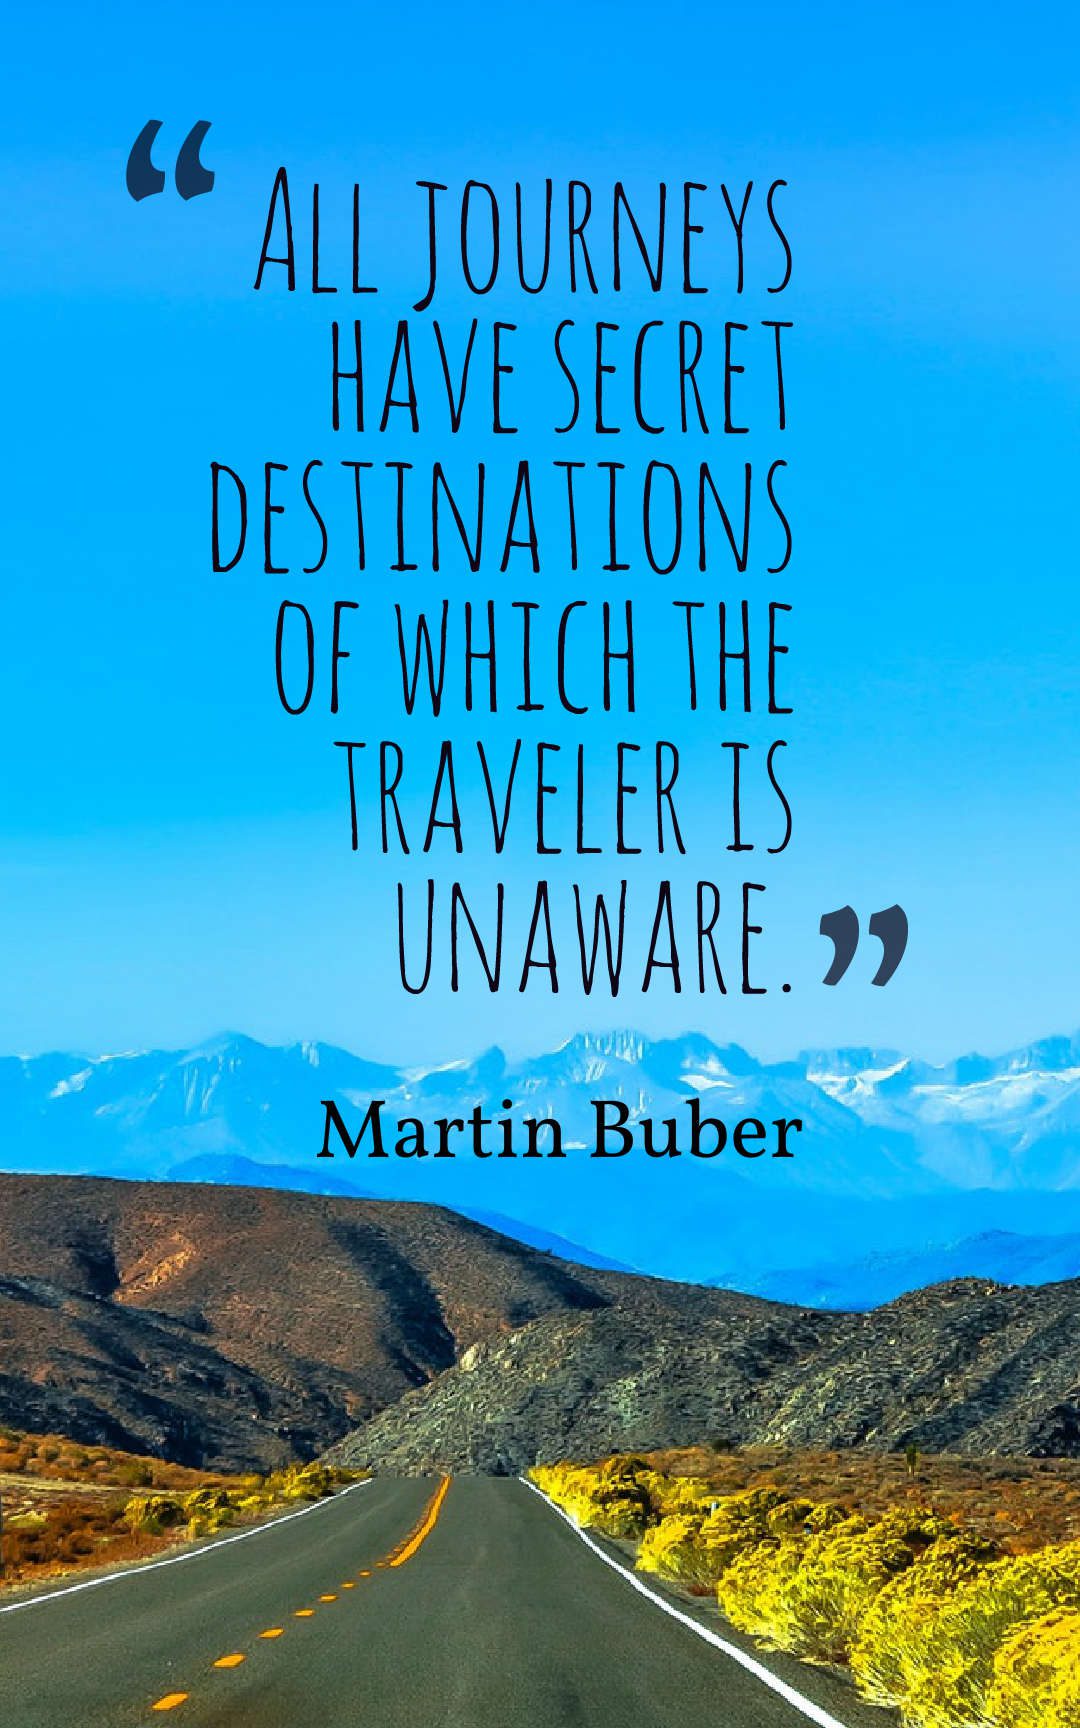 All journeys have secret destinations of which the traveler is unaware.